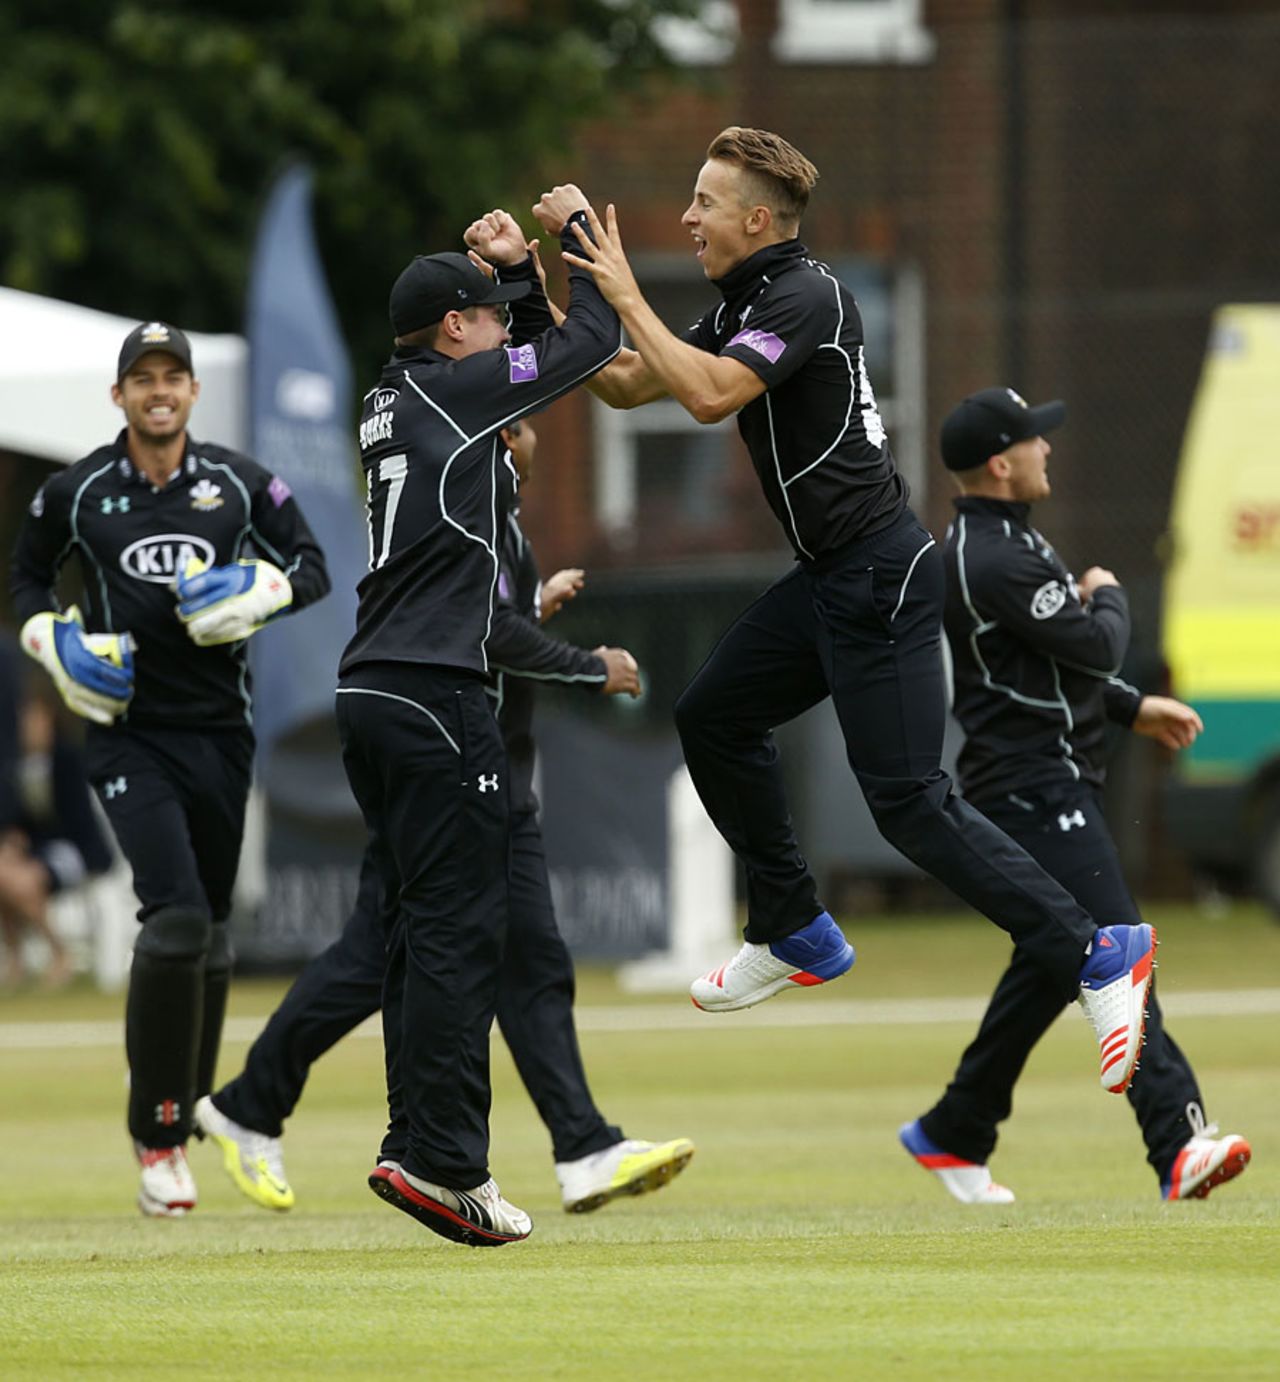 Tom Curran celebrates his first-over wicket of Chris Nash, Surrey v Sussex, Royal London Cup, South Group, June 14, 2016